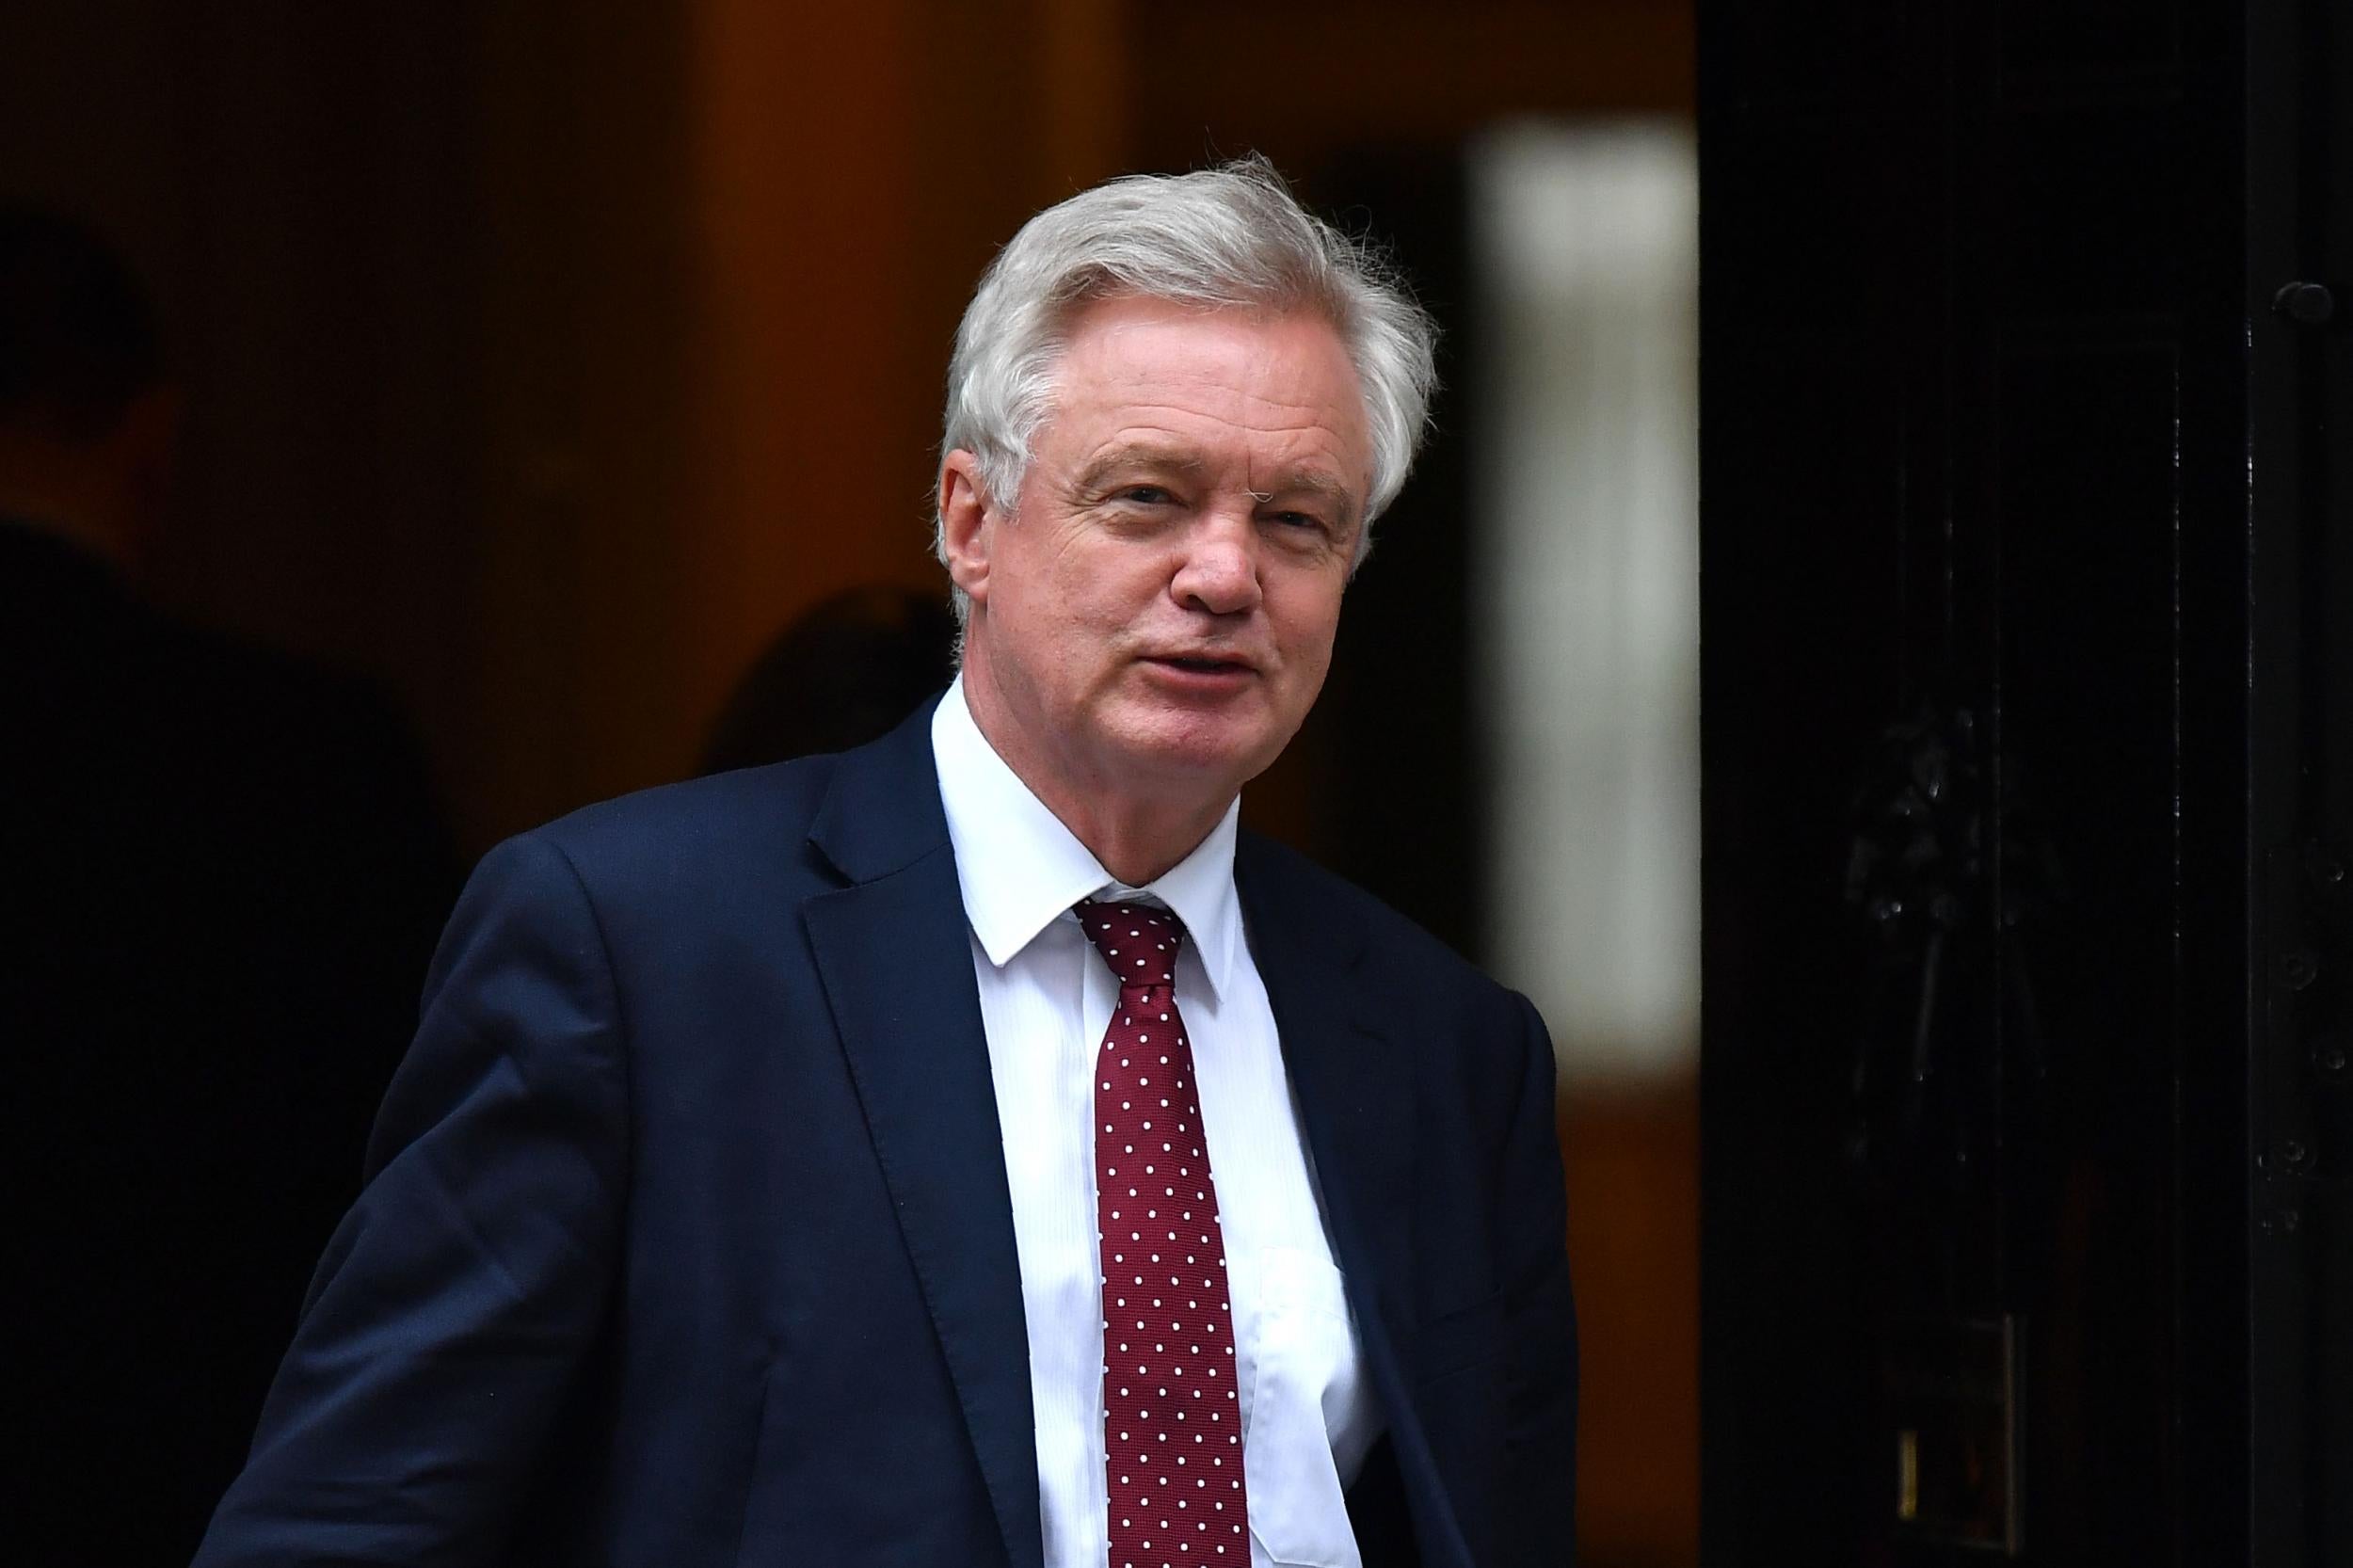 David Davis is expected to insist the Government is now ready to ‘get down to business’, after EU warnings that ‘the clock is ticking’